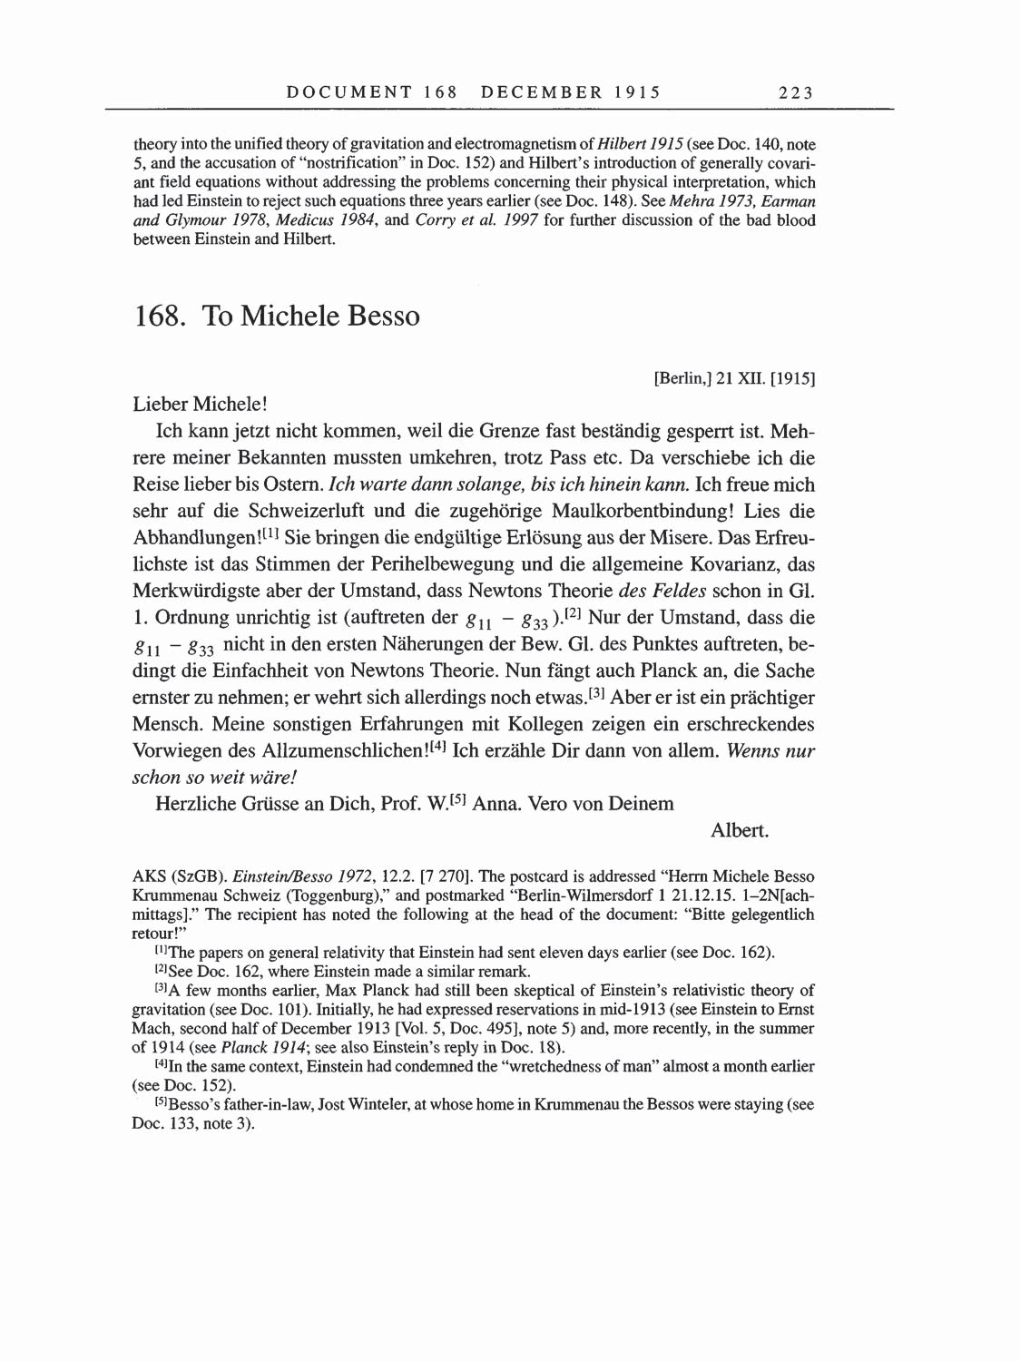 Volume 8, Part A: The Berlin Years: Correspondence 1914-1917 page 223